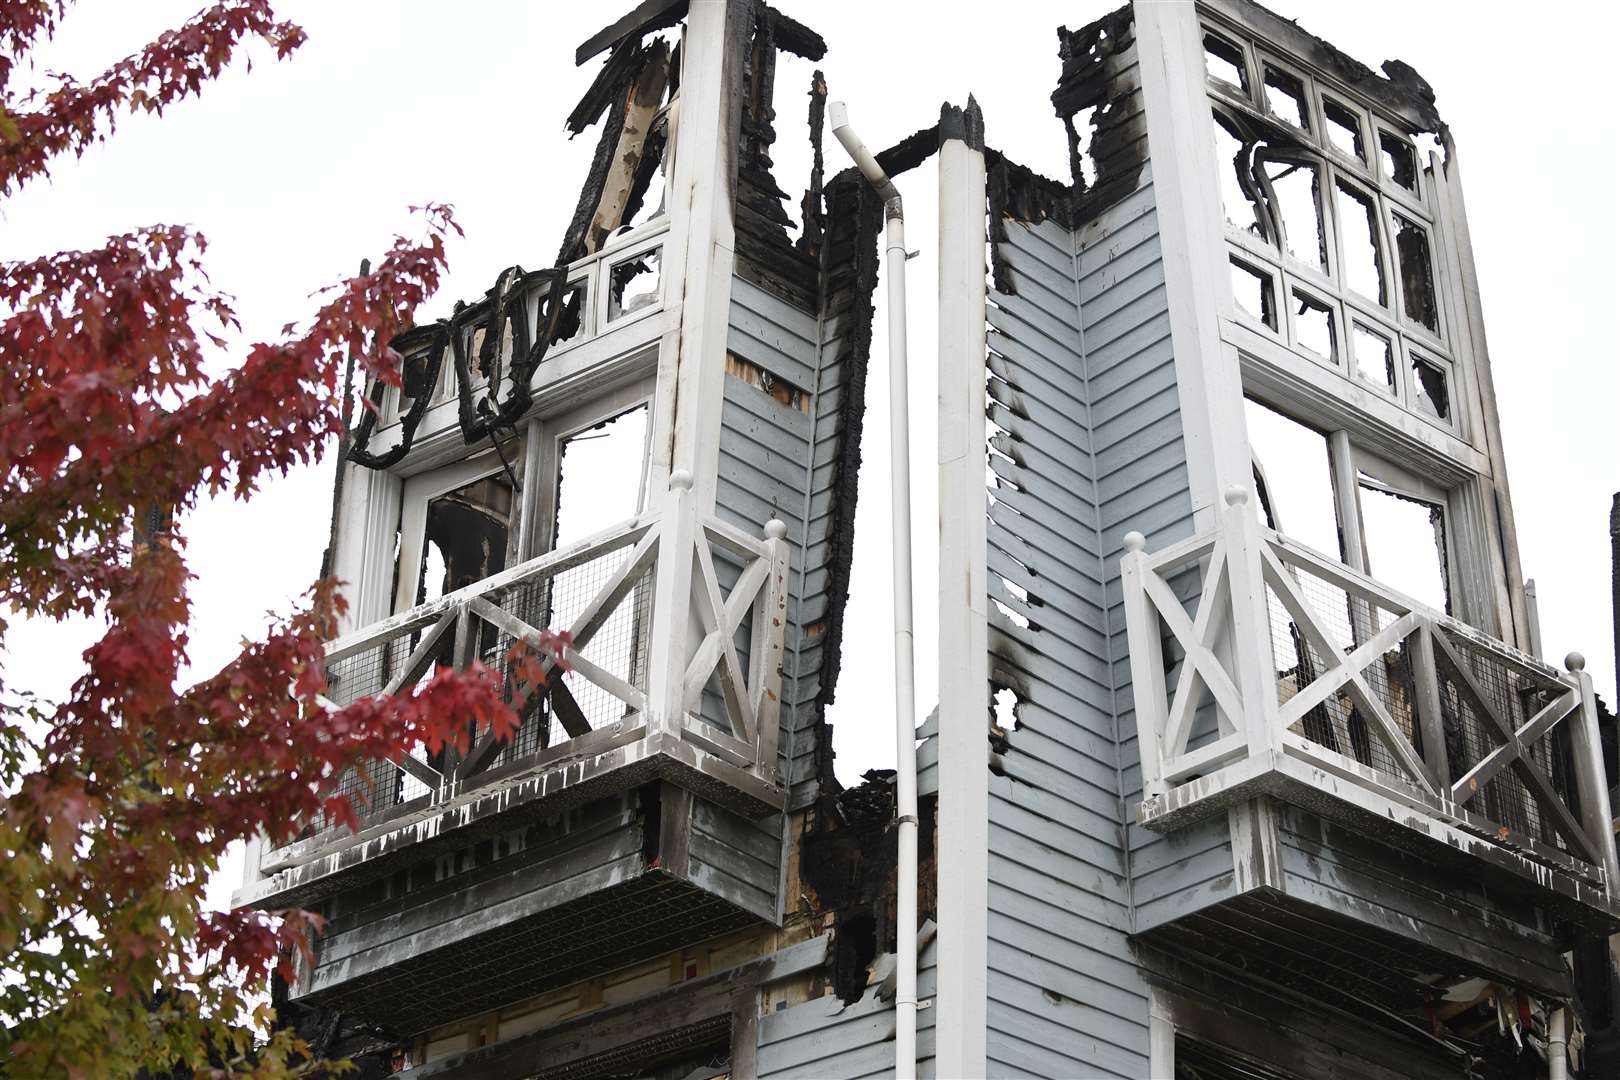 The flats were devastated by the fire